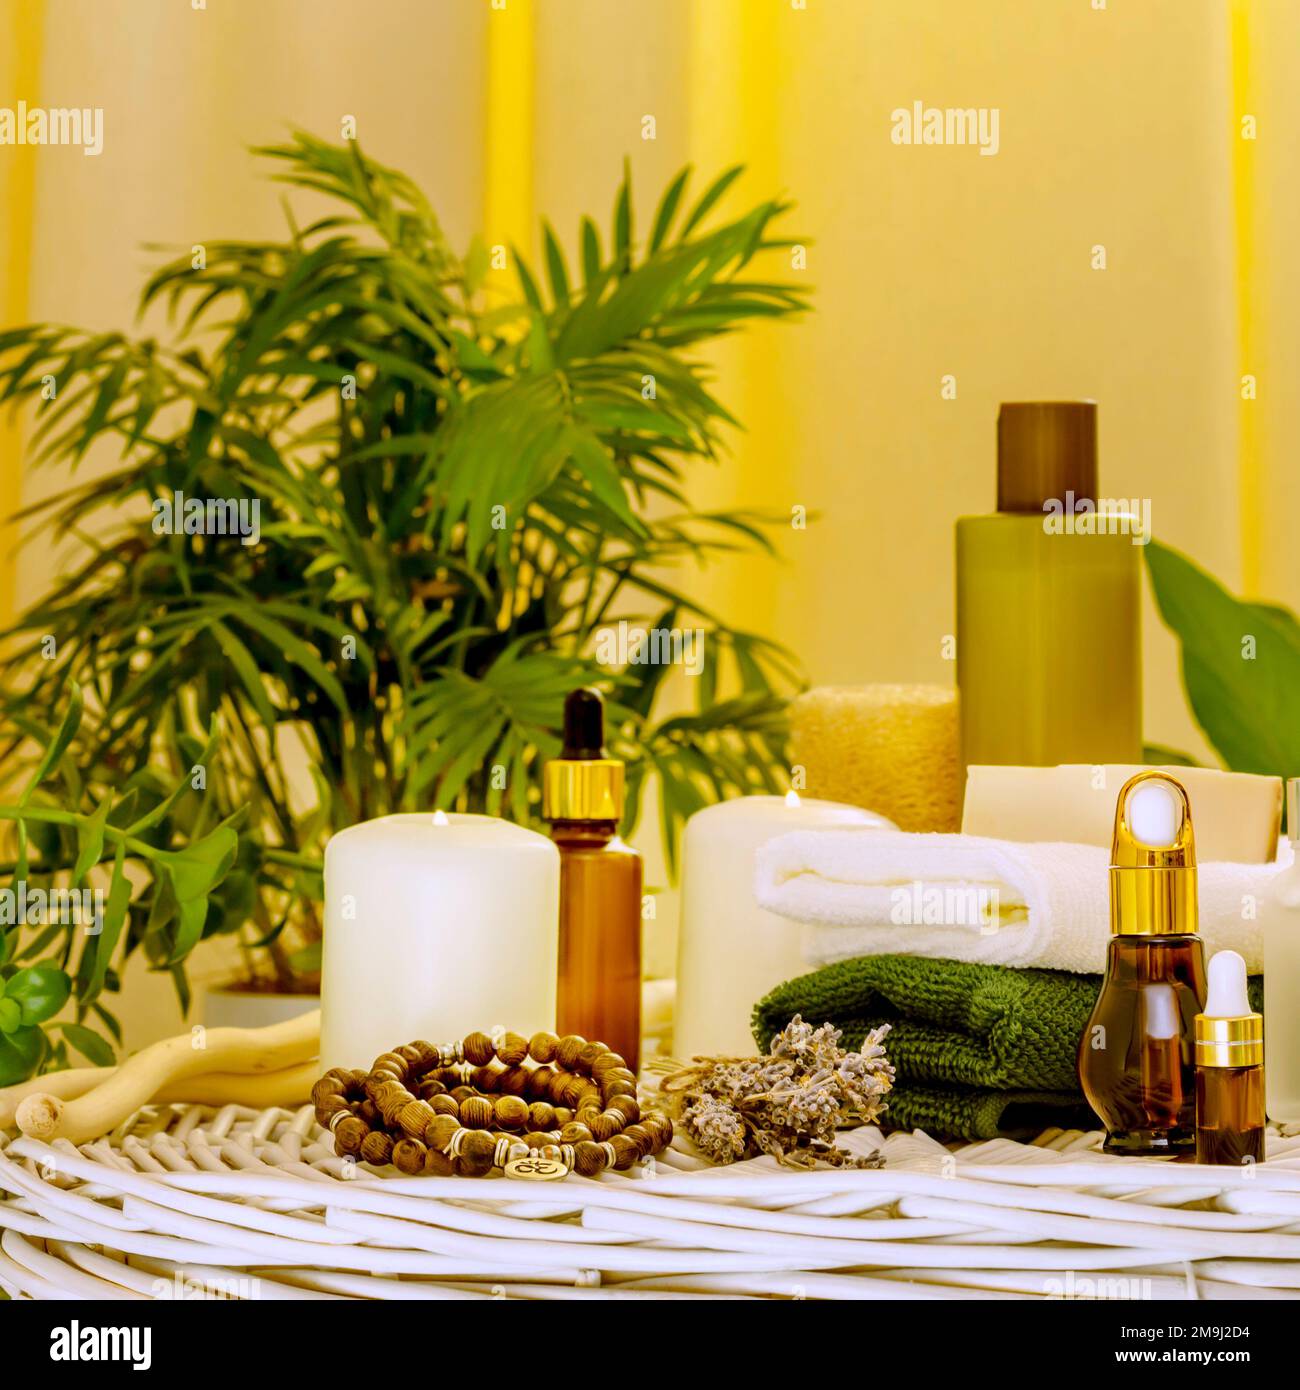 Spa relax still life with beauty products, spa accessories, towels and candles in home interior with plants. Concept of me time, self care and relaxin Stock Photo